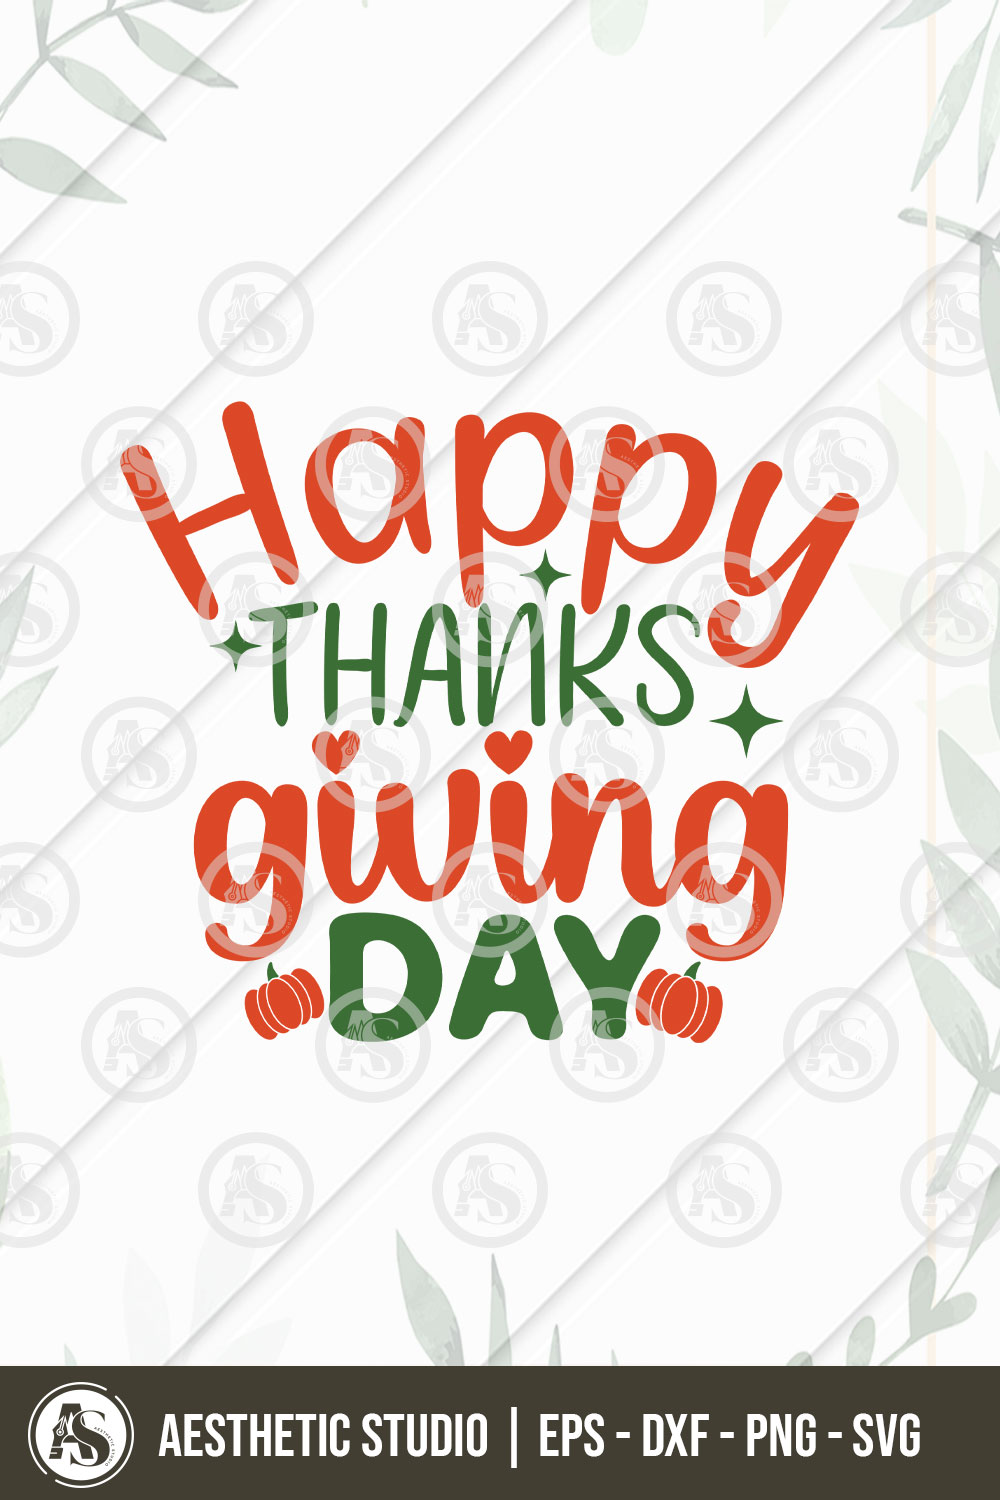 Happy Thanksgiving Day Svg, Thanksgiving Svg, Fall Svg, Pumpkin, Thanksgiving Shirt Png Cut Files, Turkey svg, Gobble Svg, Pumpkin Spice, Fall Leaves Svg, Autumn Svg, Grateful svg, Thanksgiving Quote, Cut Files for Cricut, pinterest preview image.